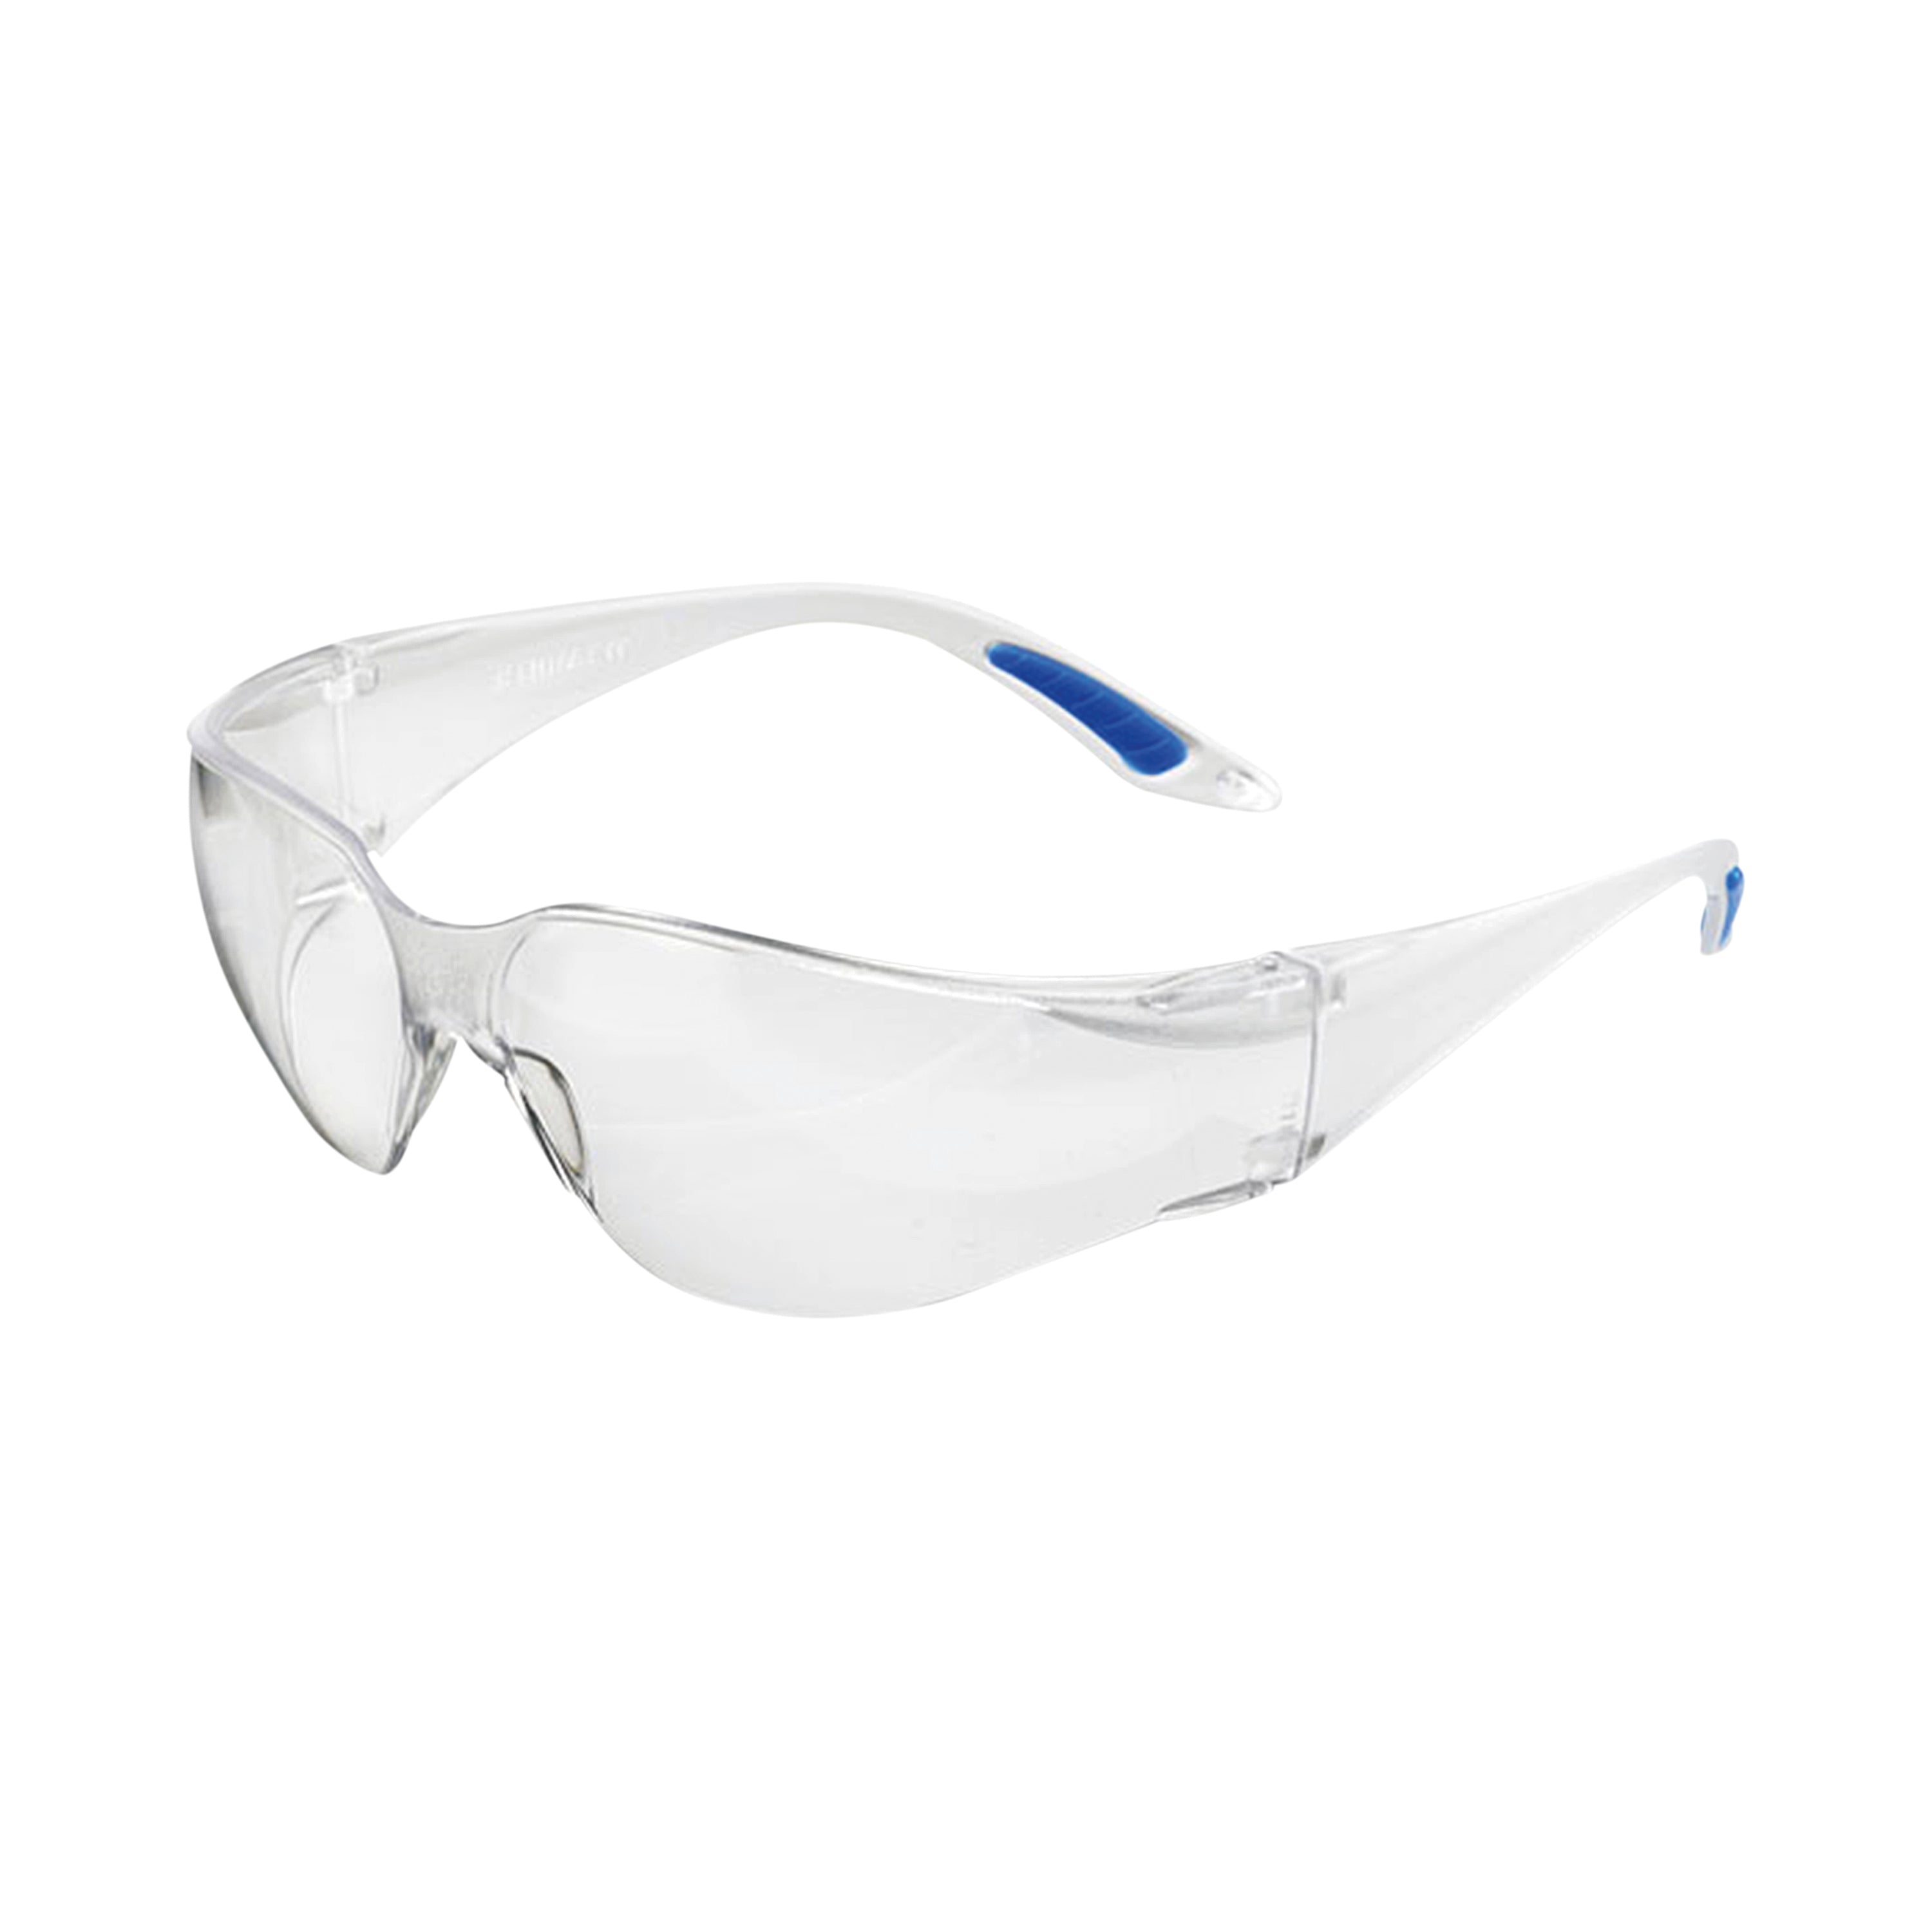 Vegas Safety Spectacles Wrap Around Clear Lens BBVS